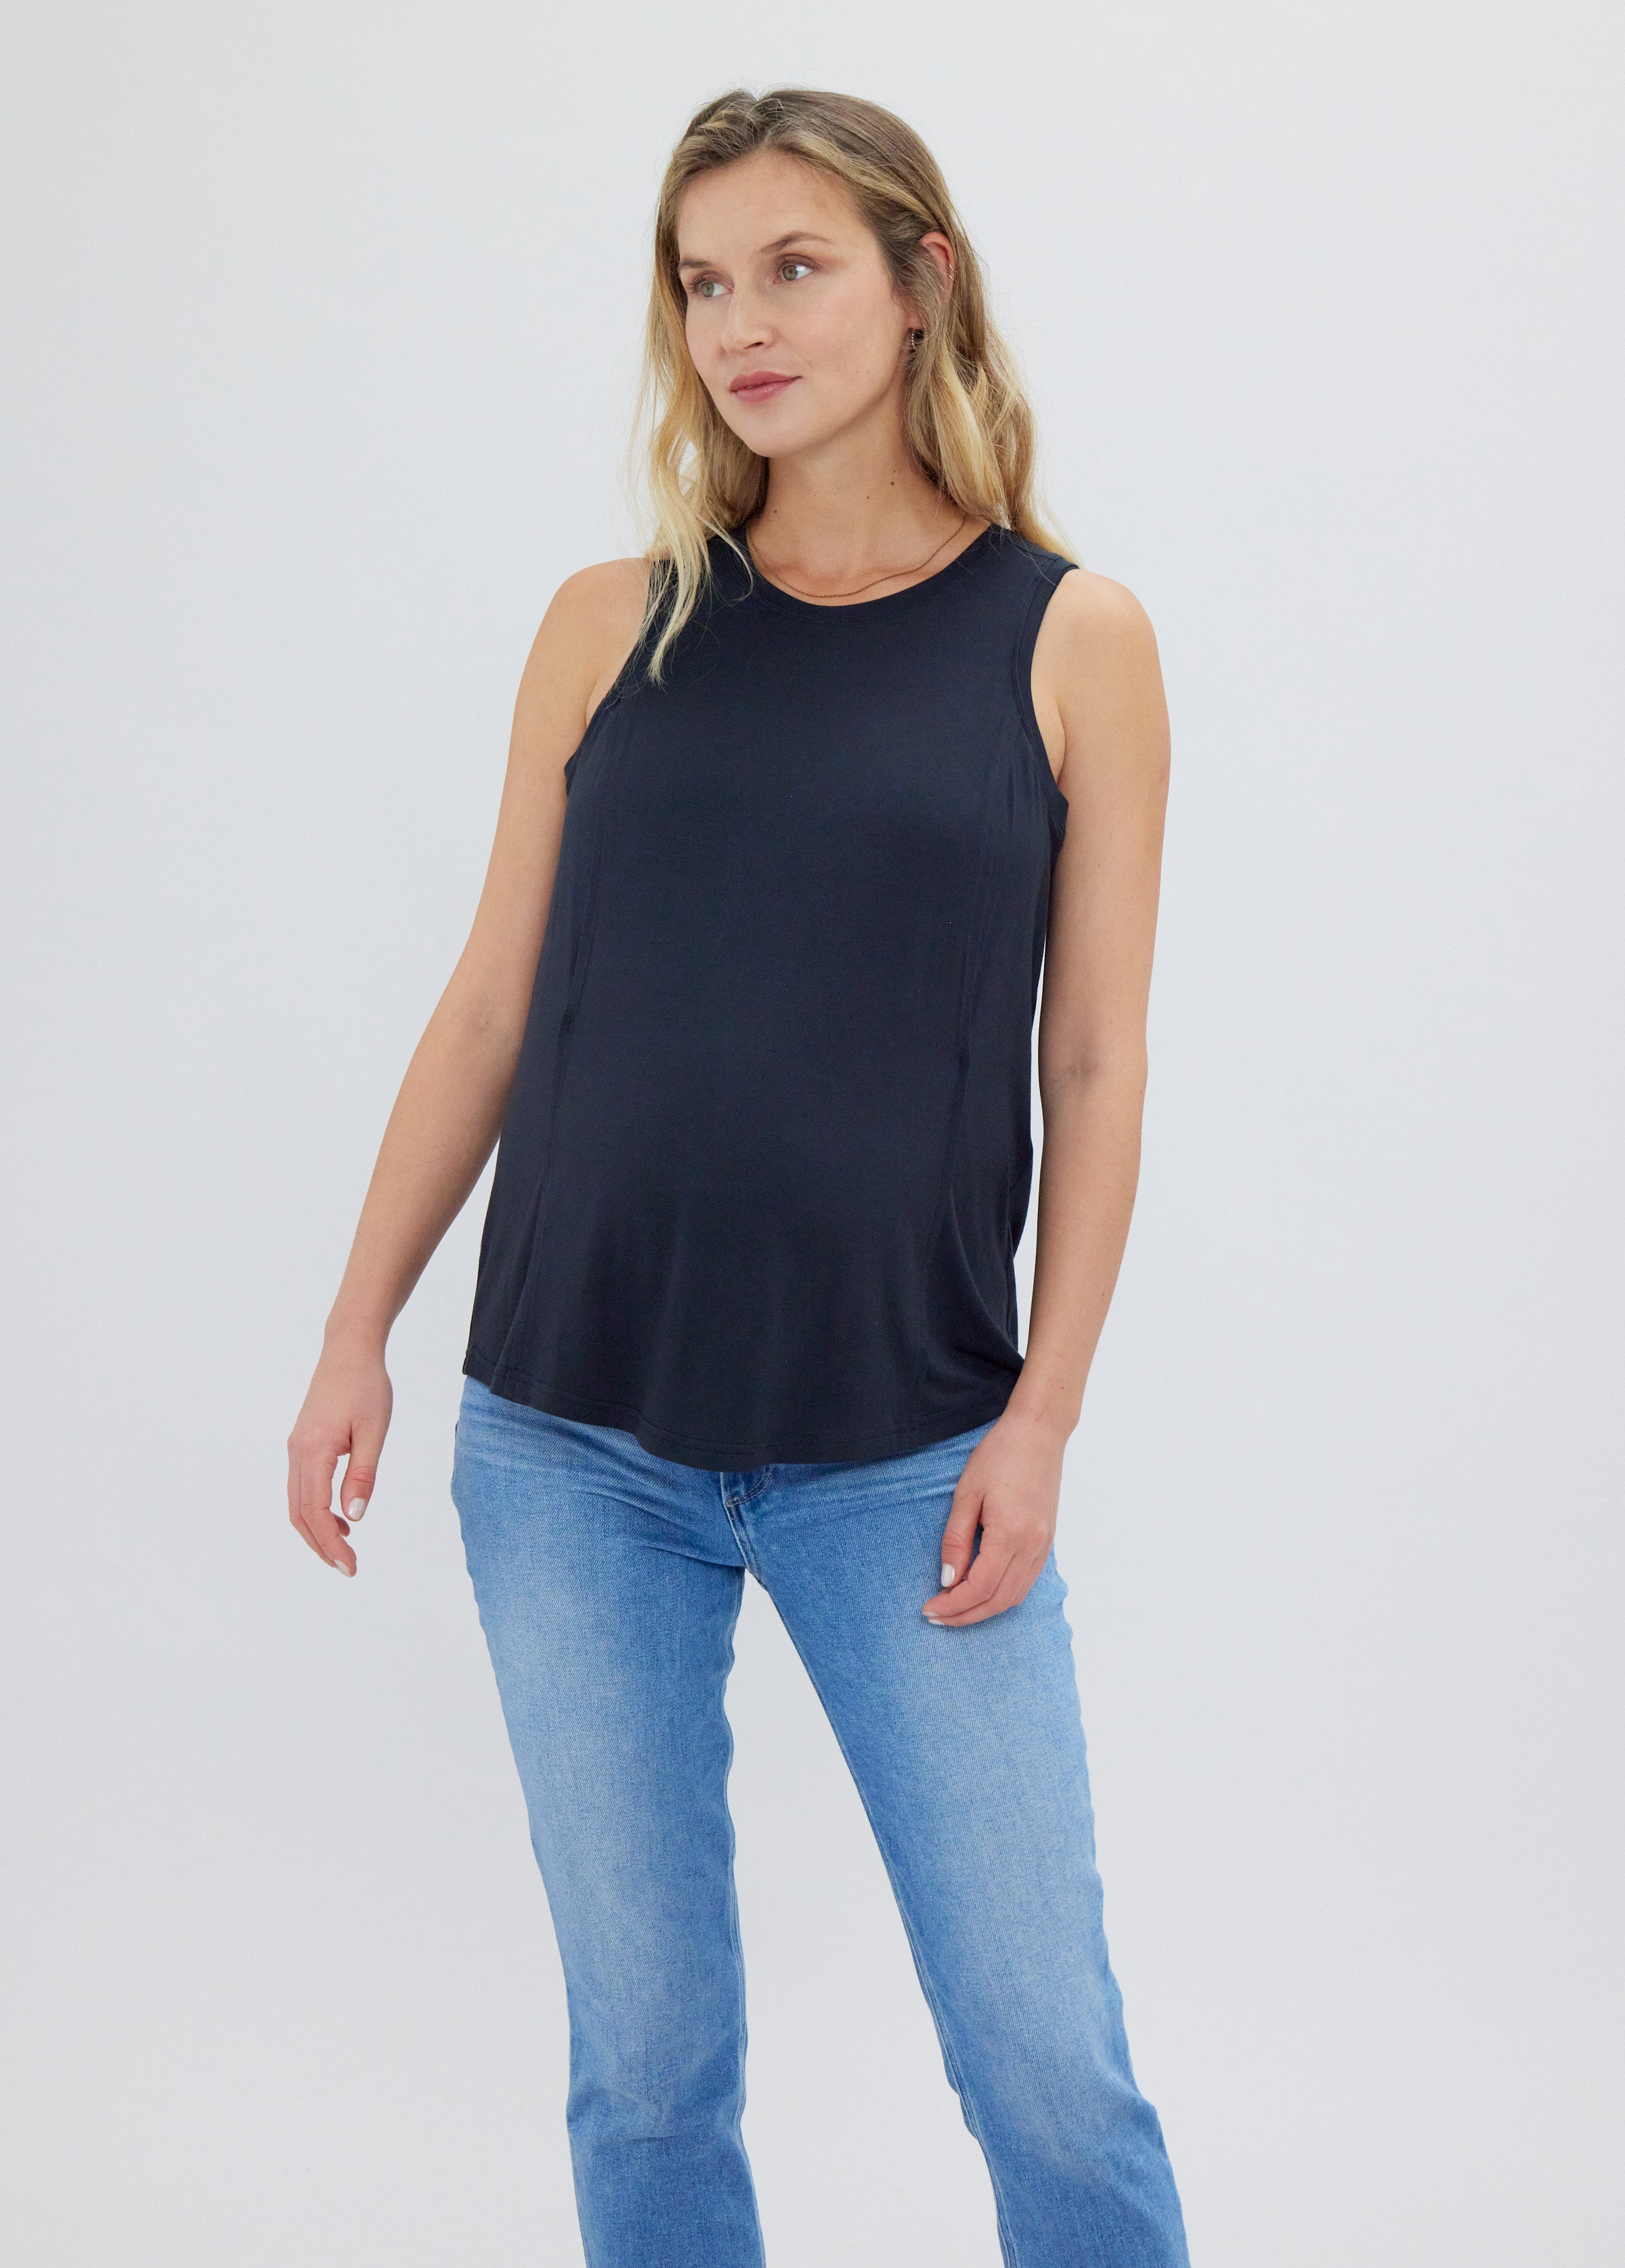 The Always-On Nursing Tank: Made with a lactation expert – Bodily